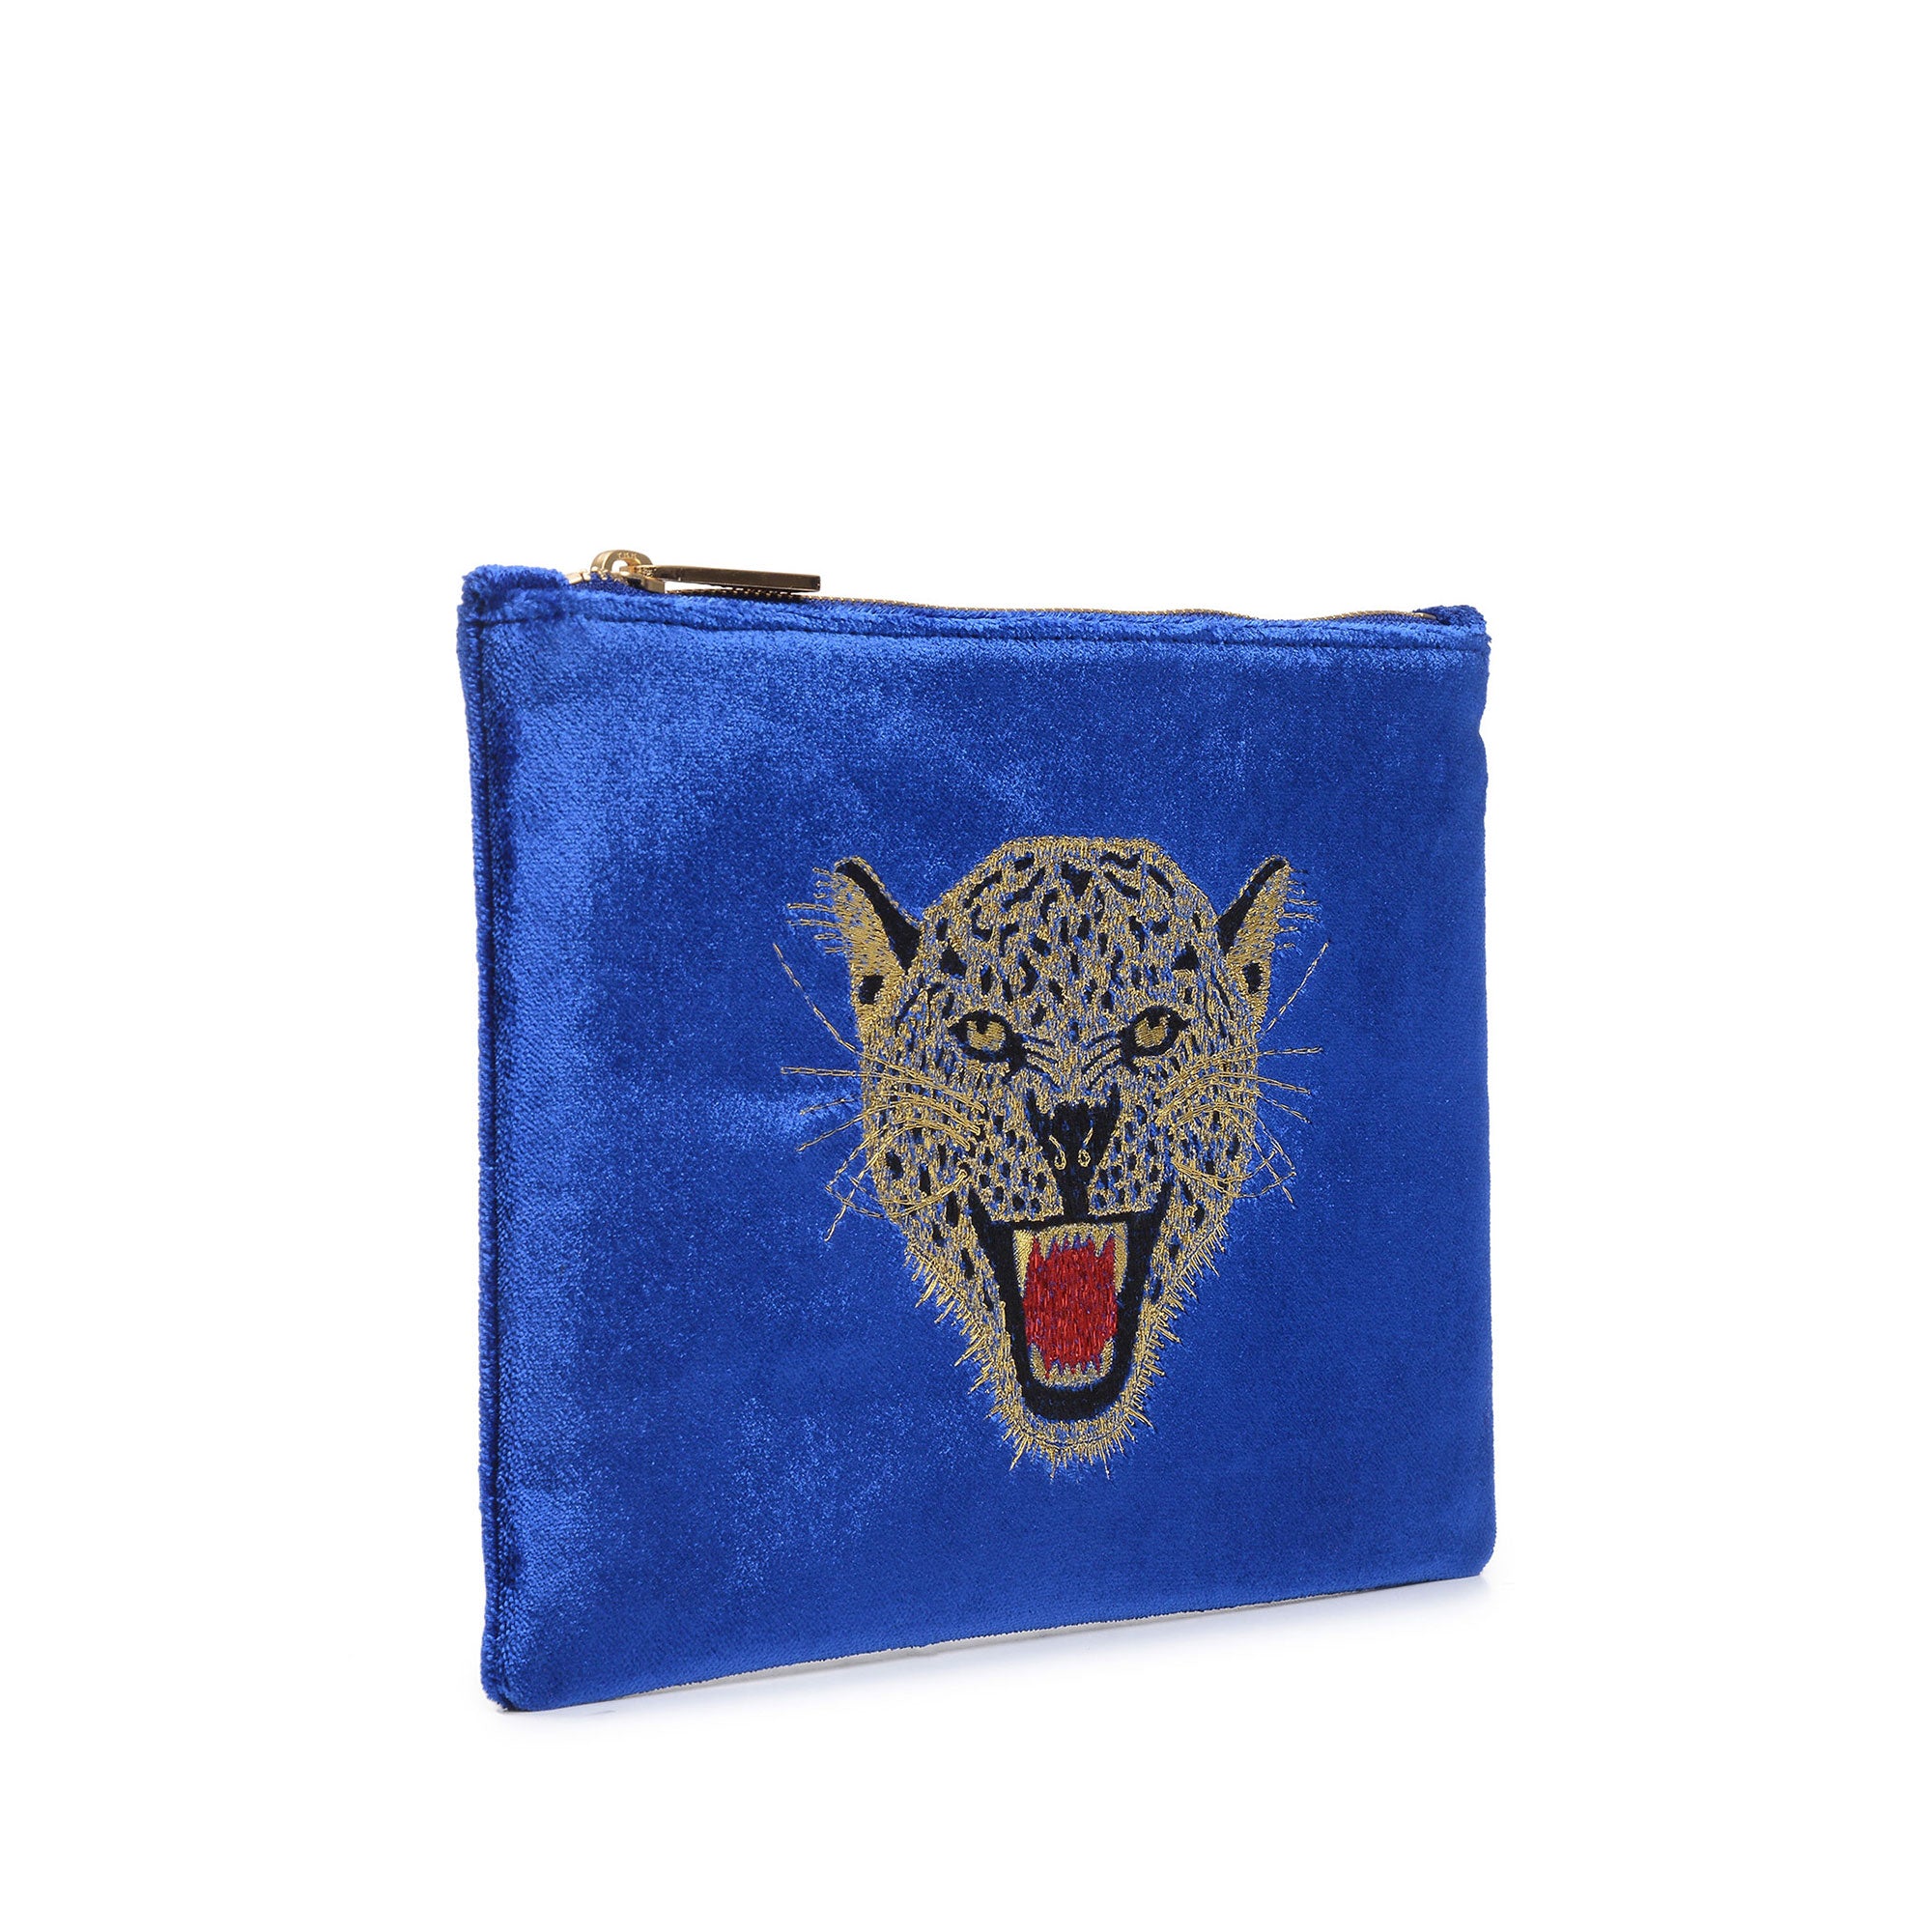 LEOPARD EMBROIDERED CLUTCH BAG